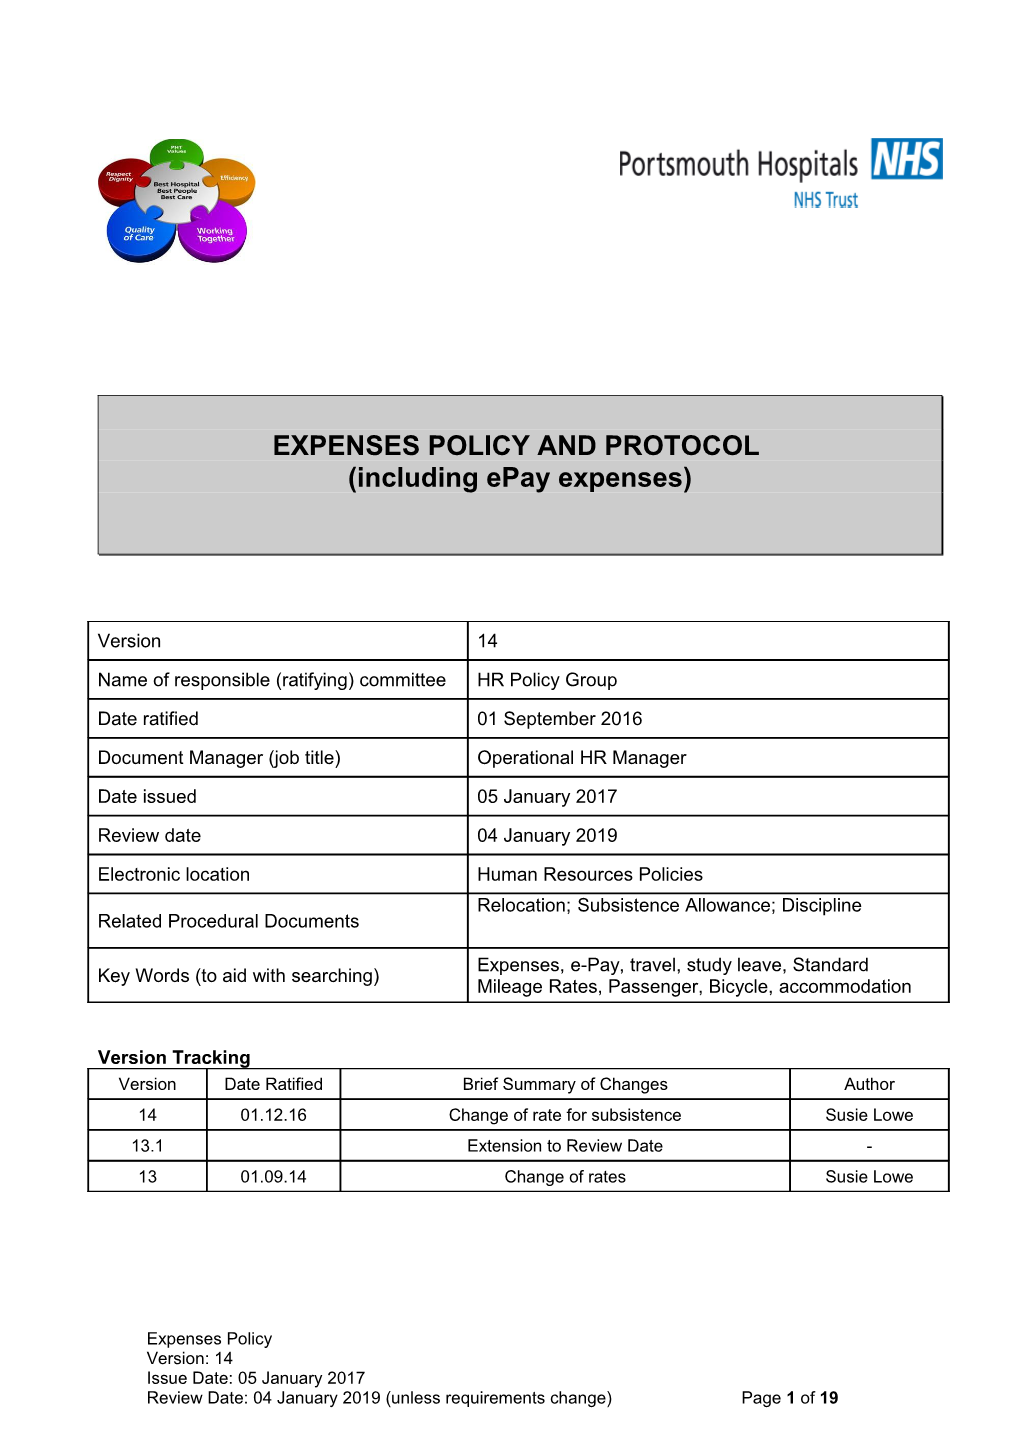 Expenses Policy and Protocol